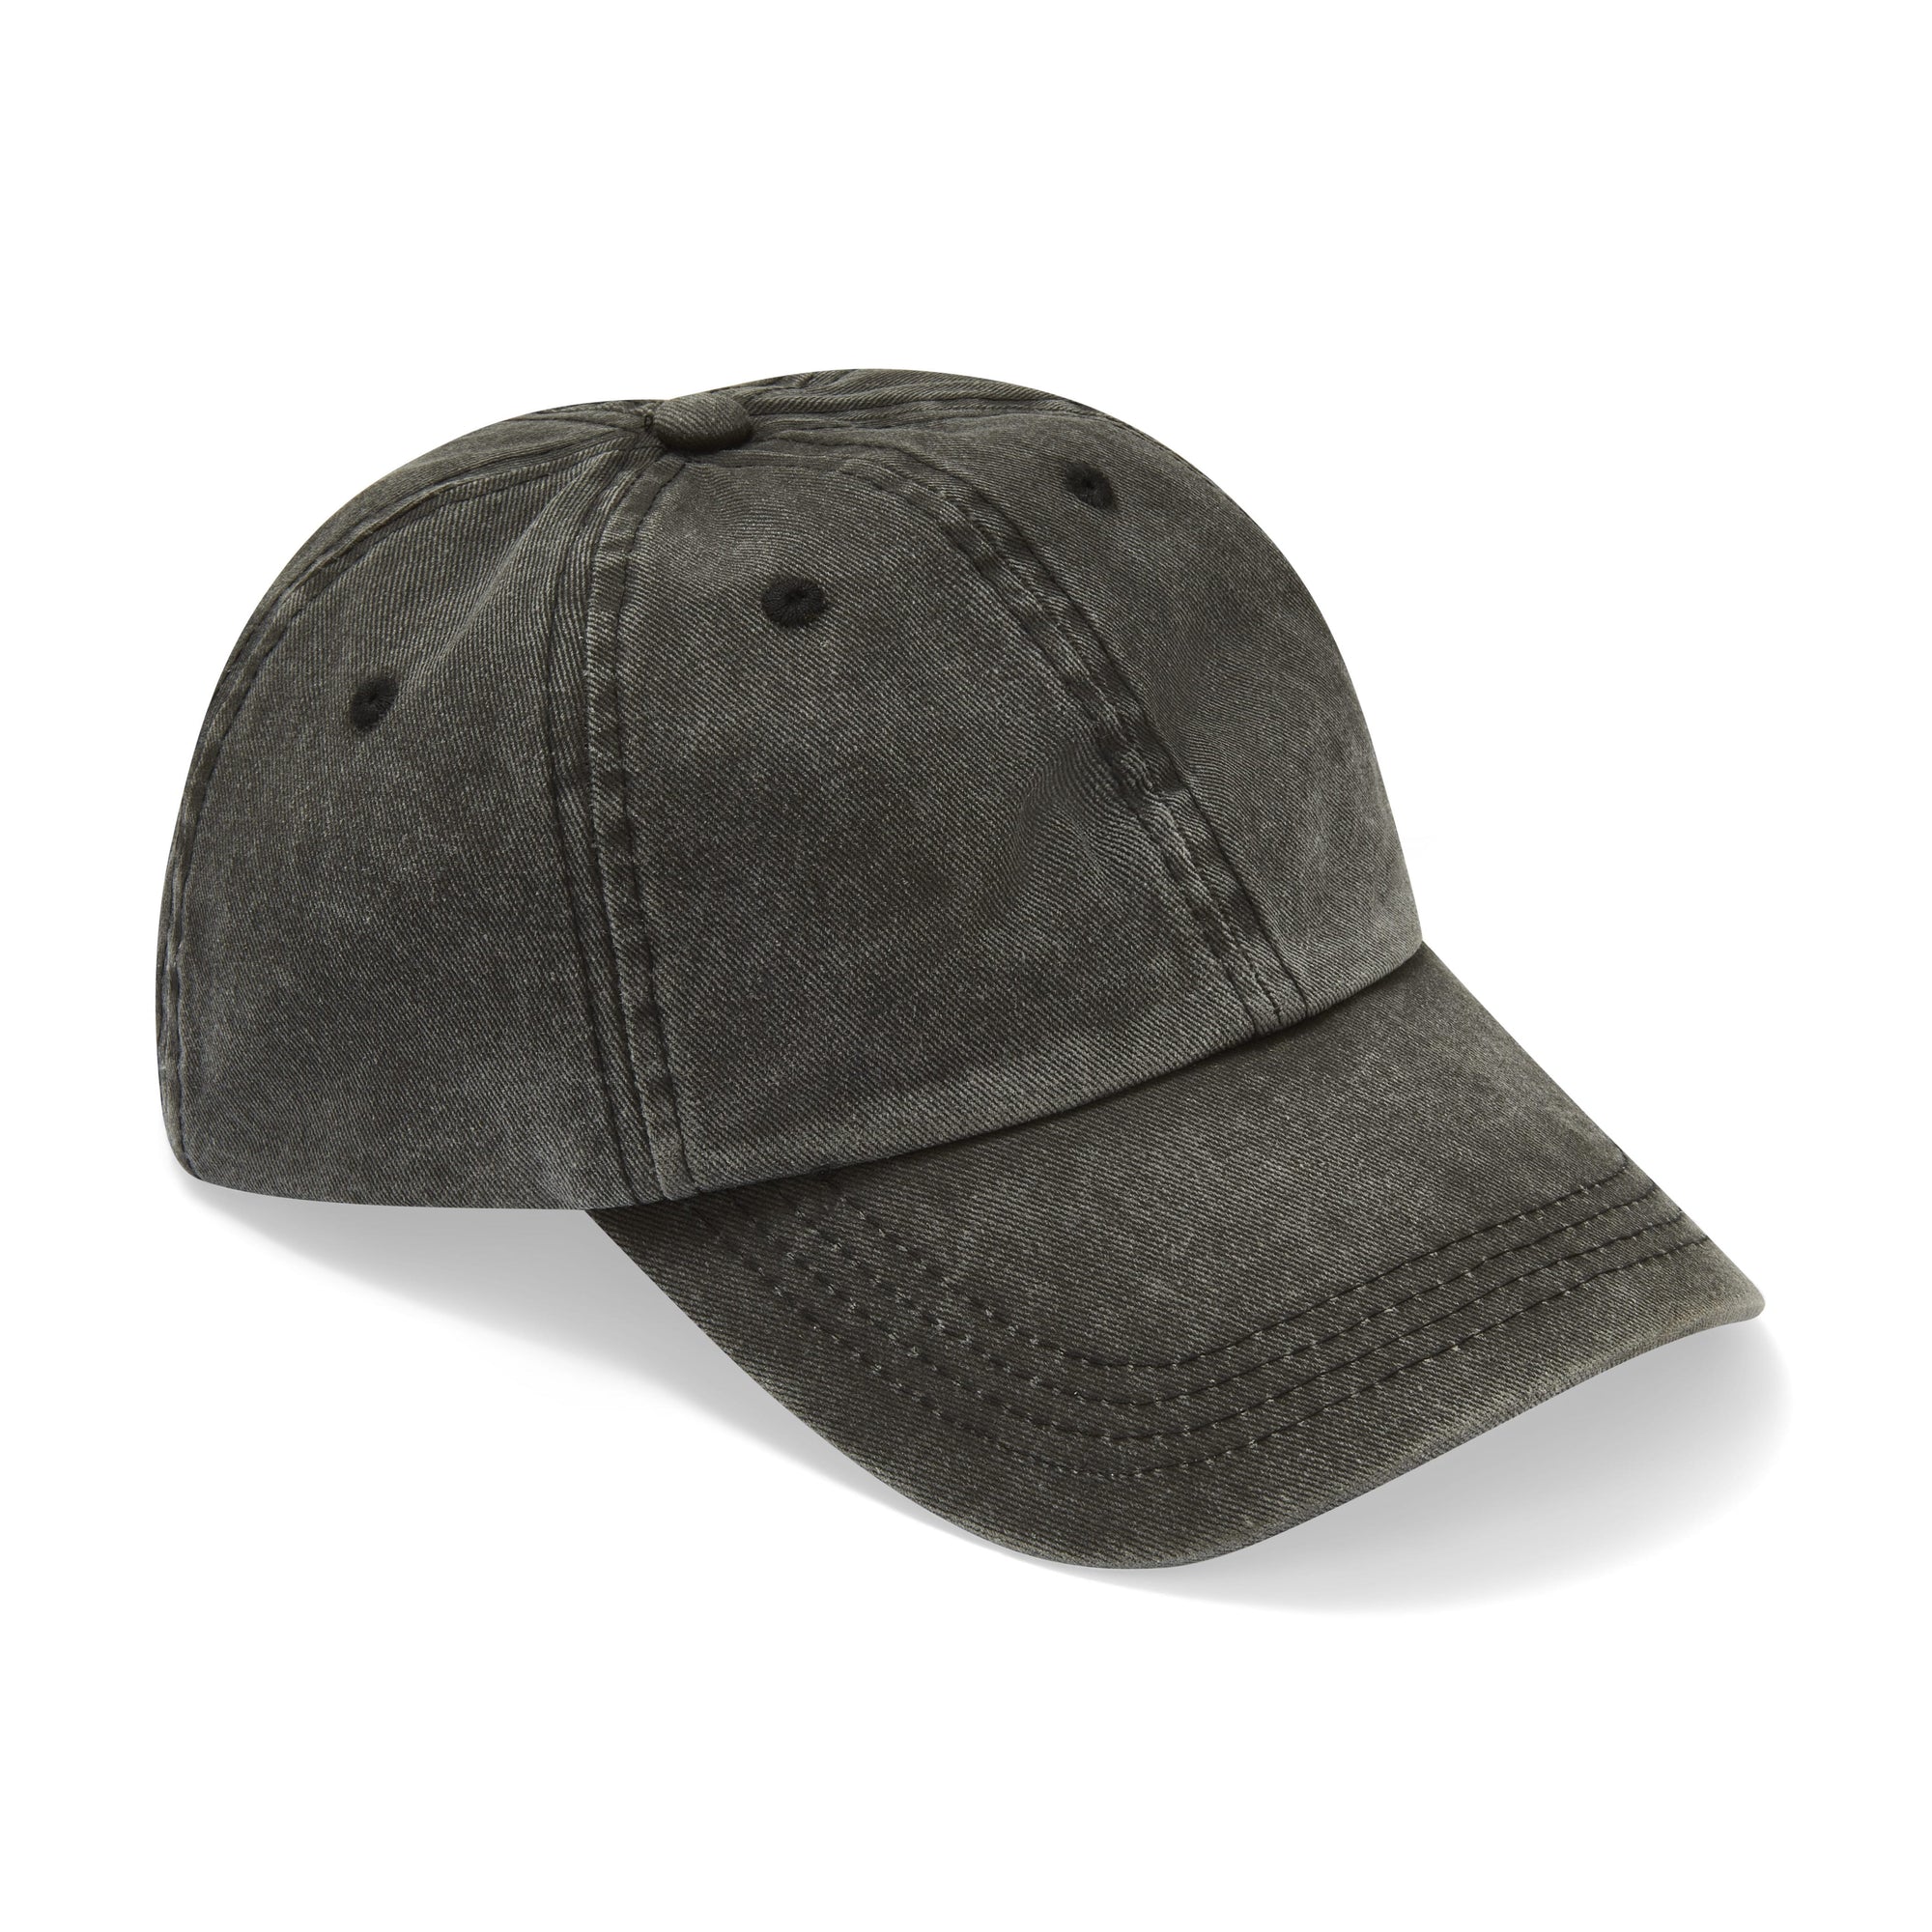 Only Curls Satin Lined Baseball Hat  - Washed Grey - Only Curls